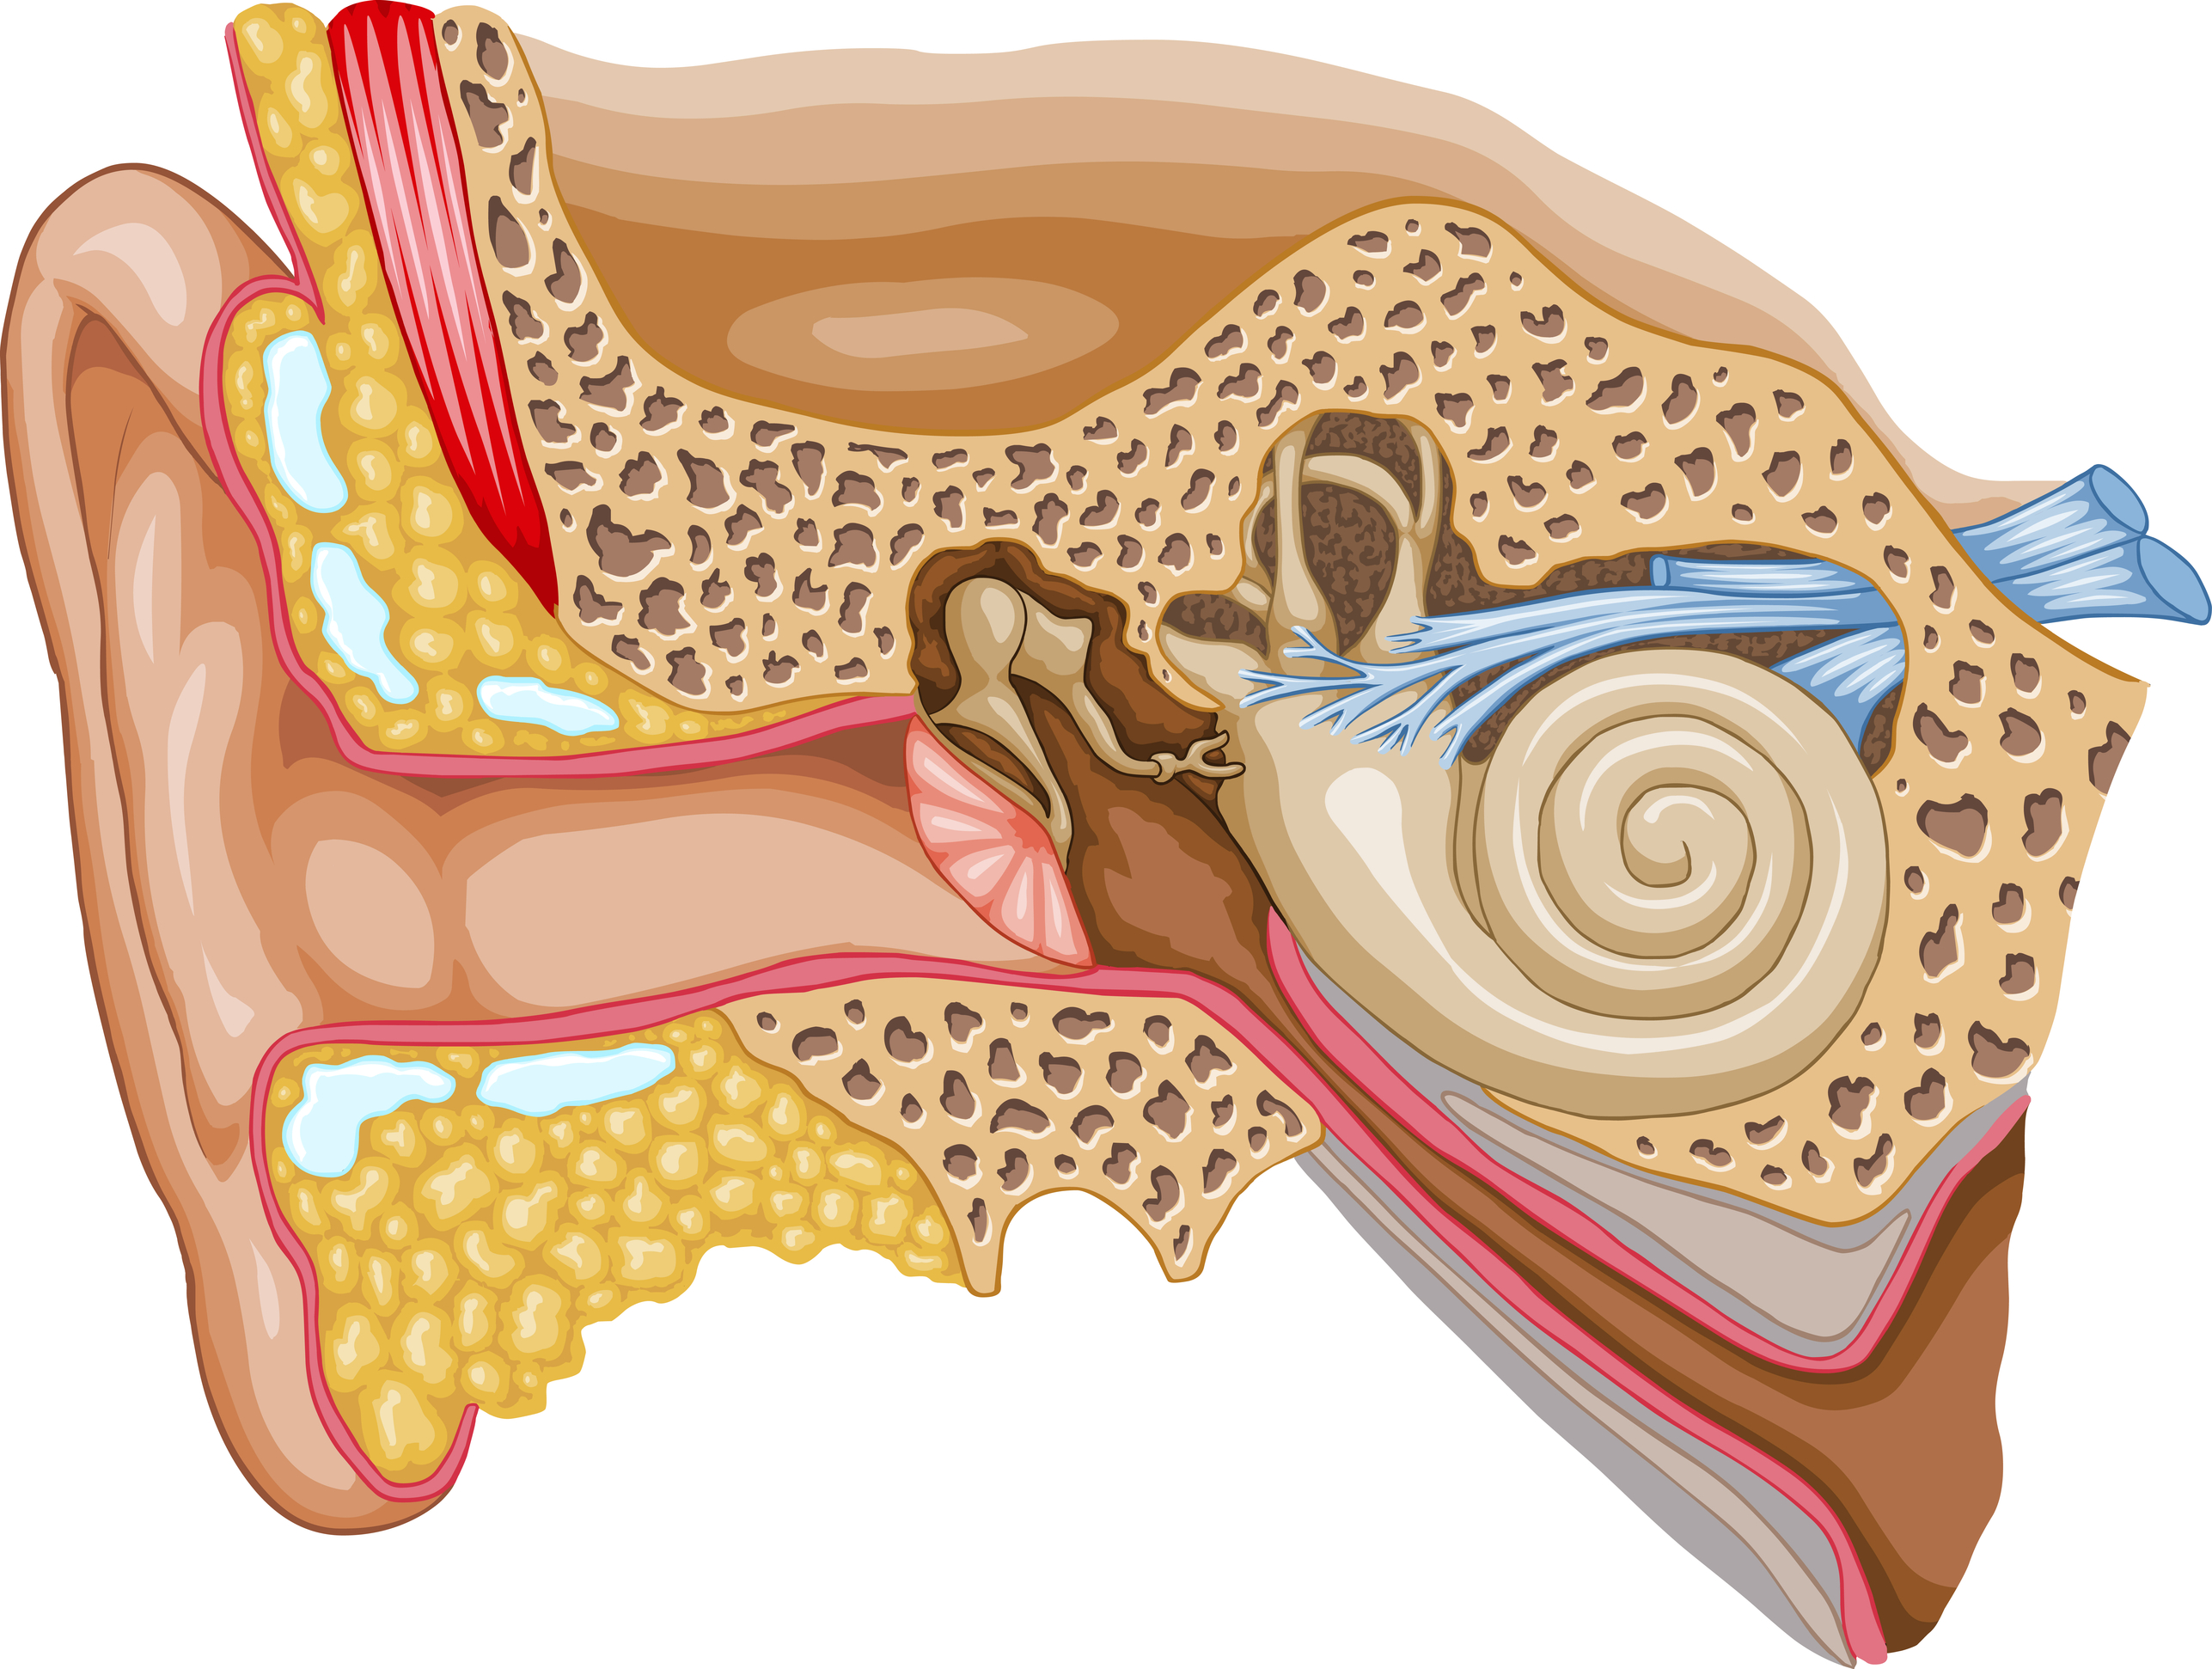 Anatomy Of The Ear And Eye Coloring | Sexiz Pix